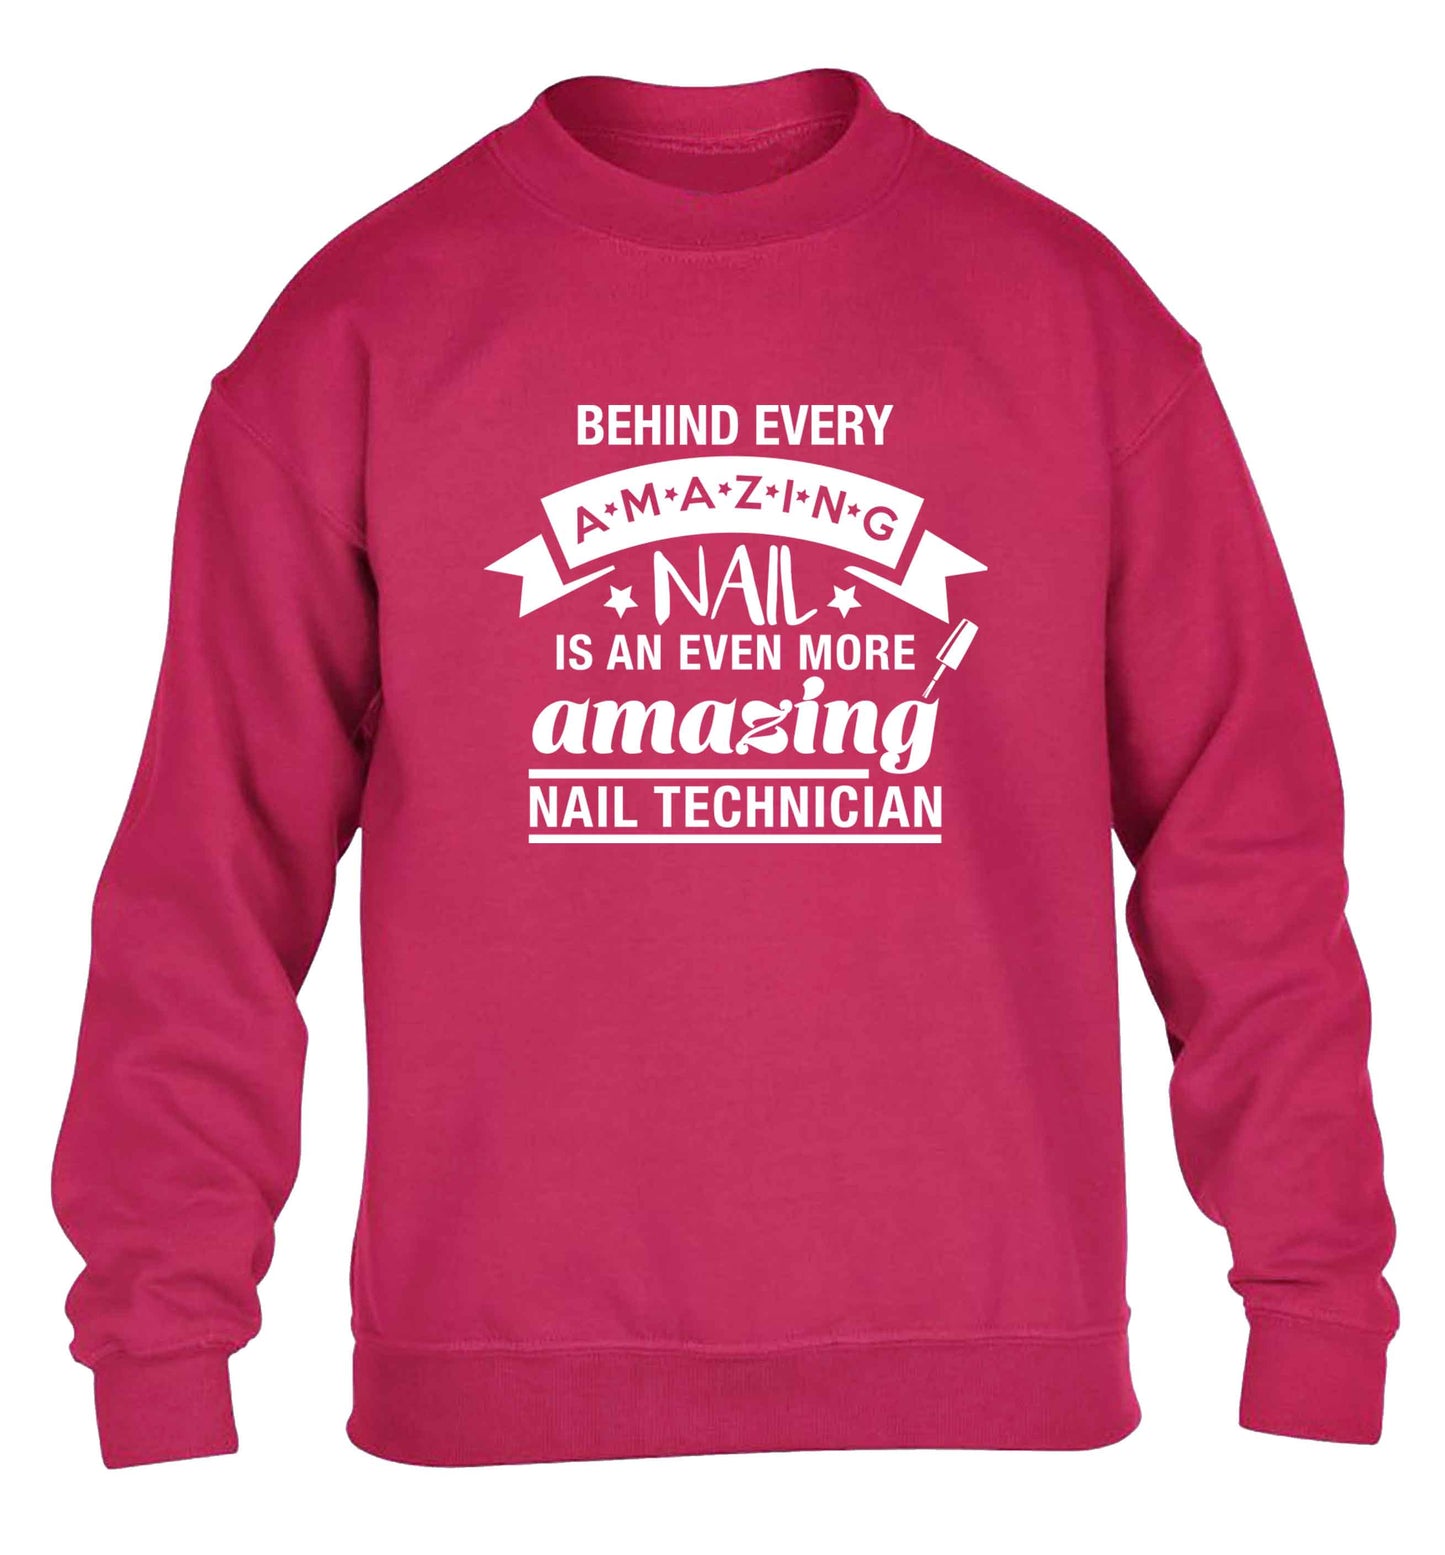 Behind every amazing nail is an even more amazing nail technician children's pink sweater 12-13 Years